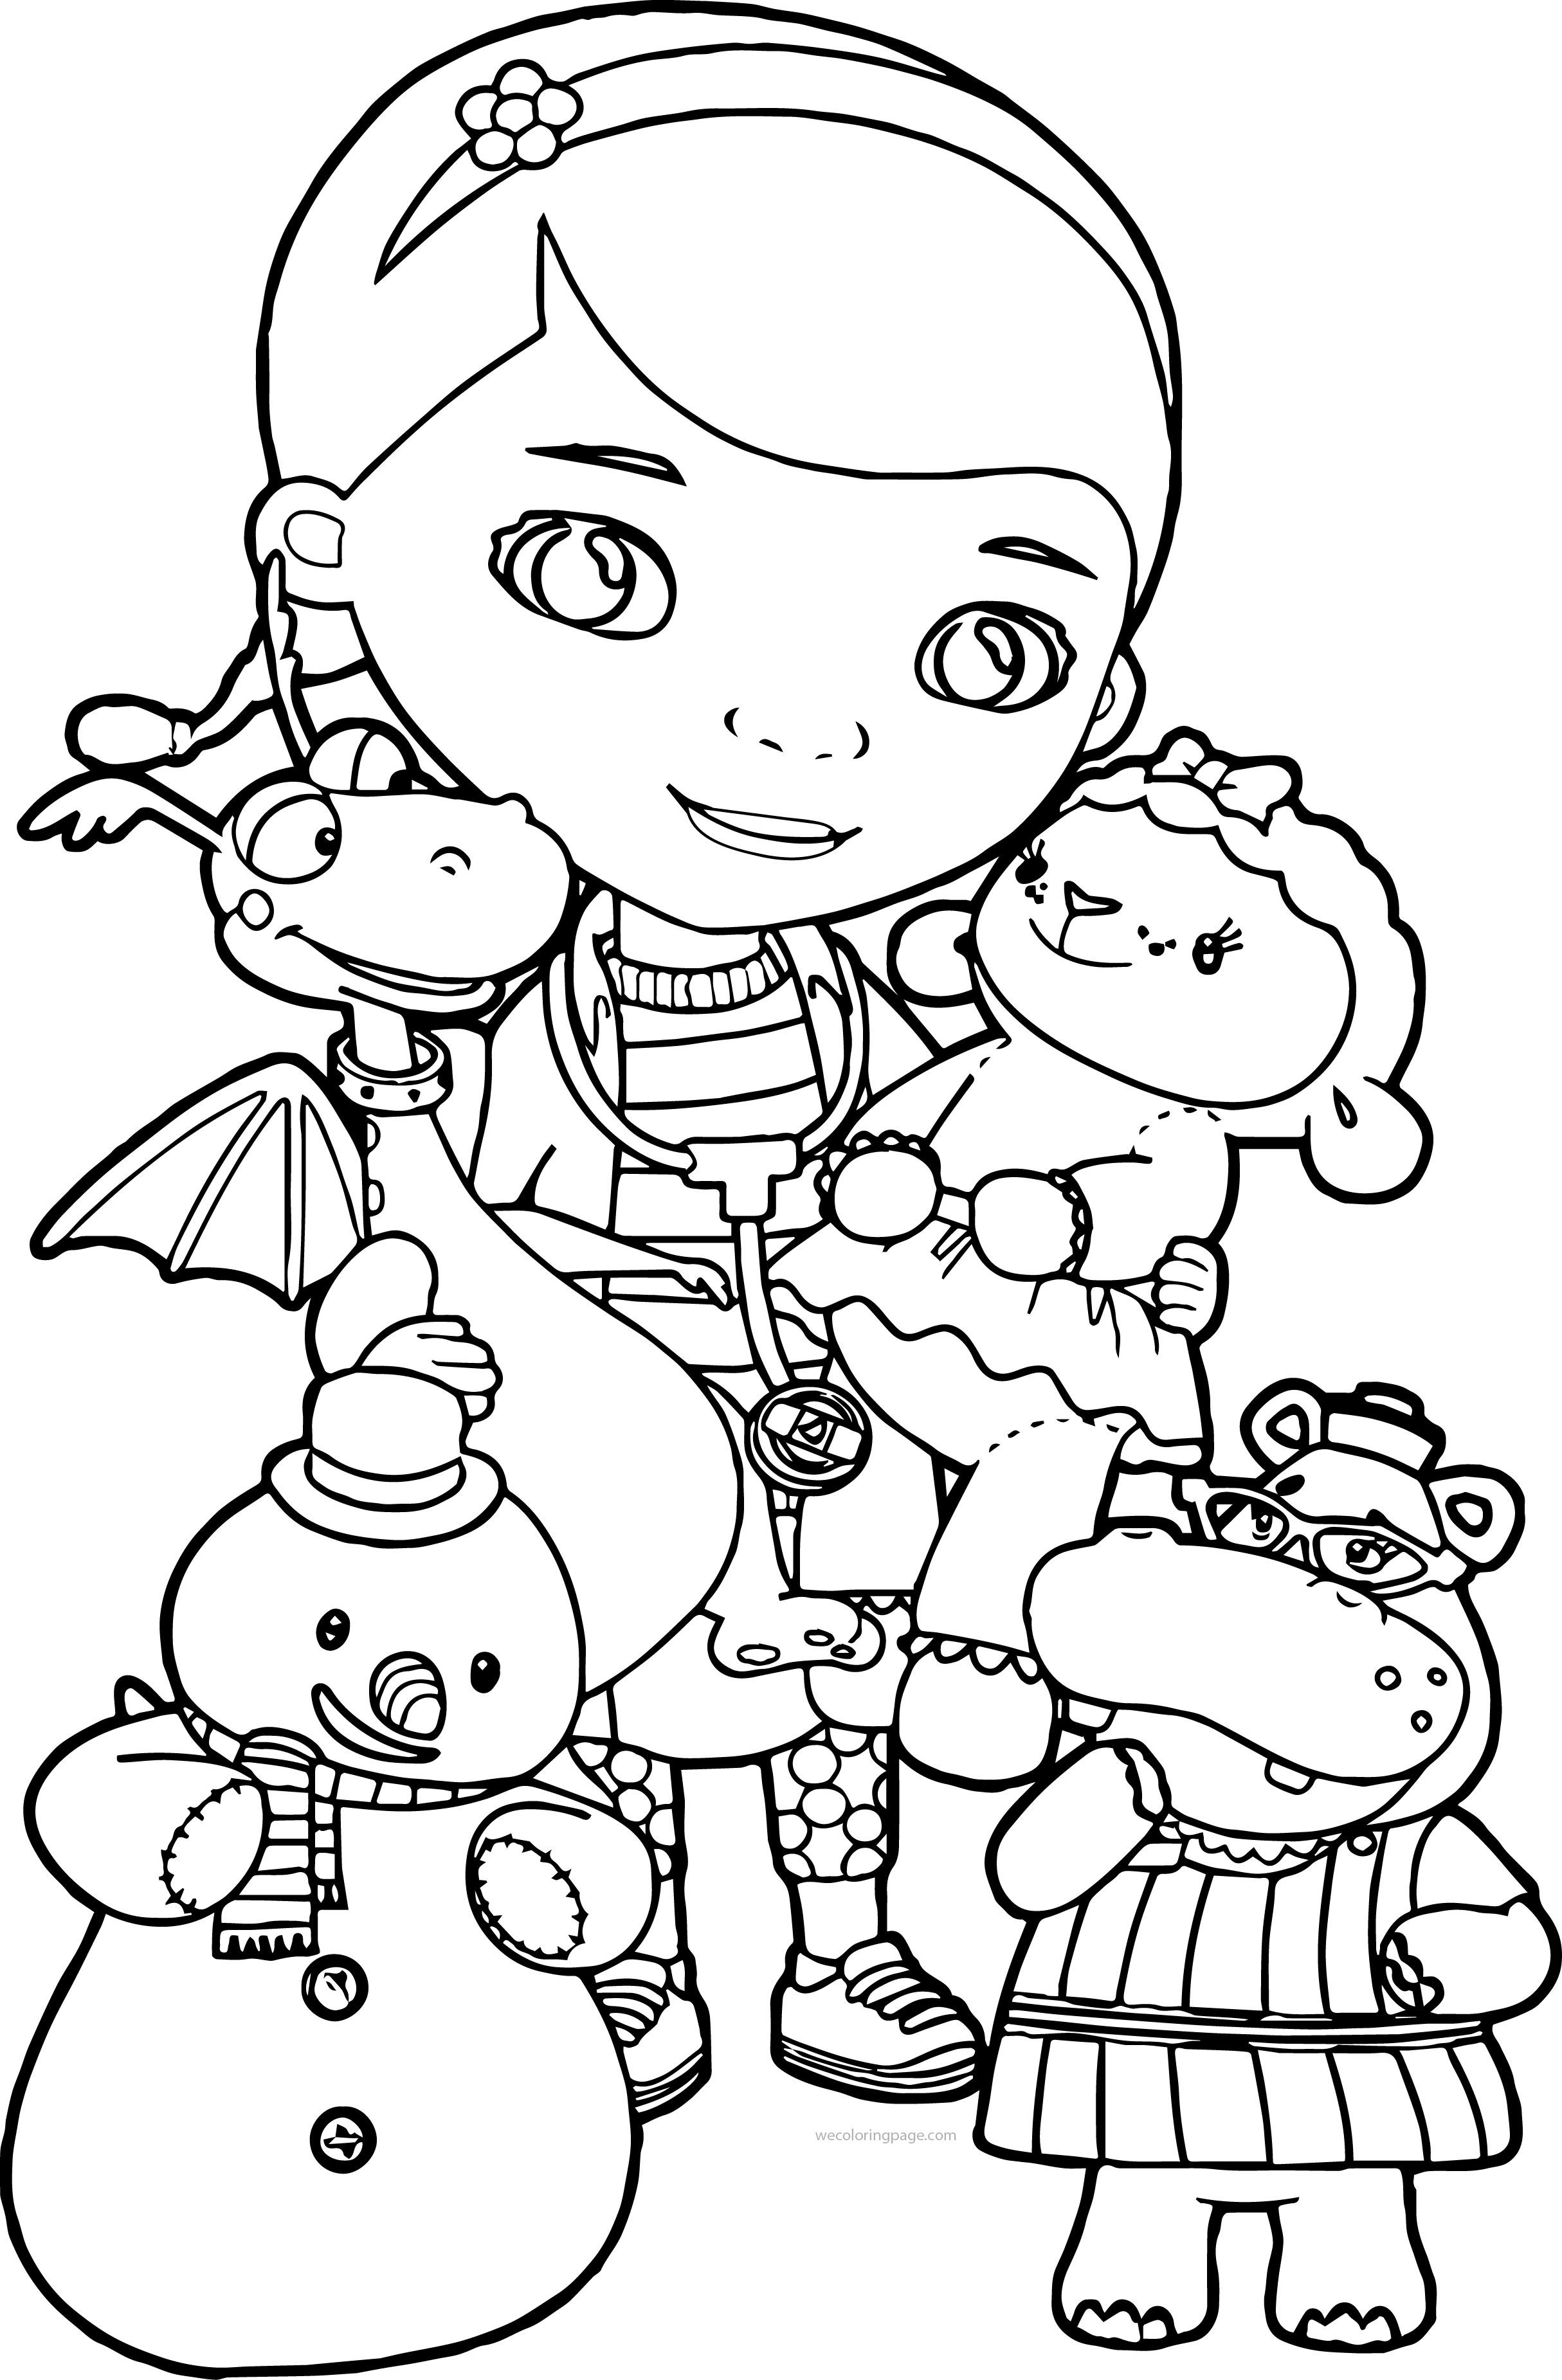 Doc Mcstuffins Coloring Pages At GetDrawings Free Download